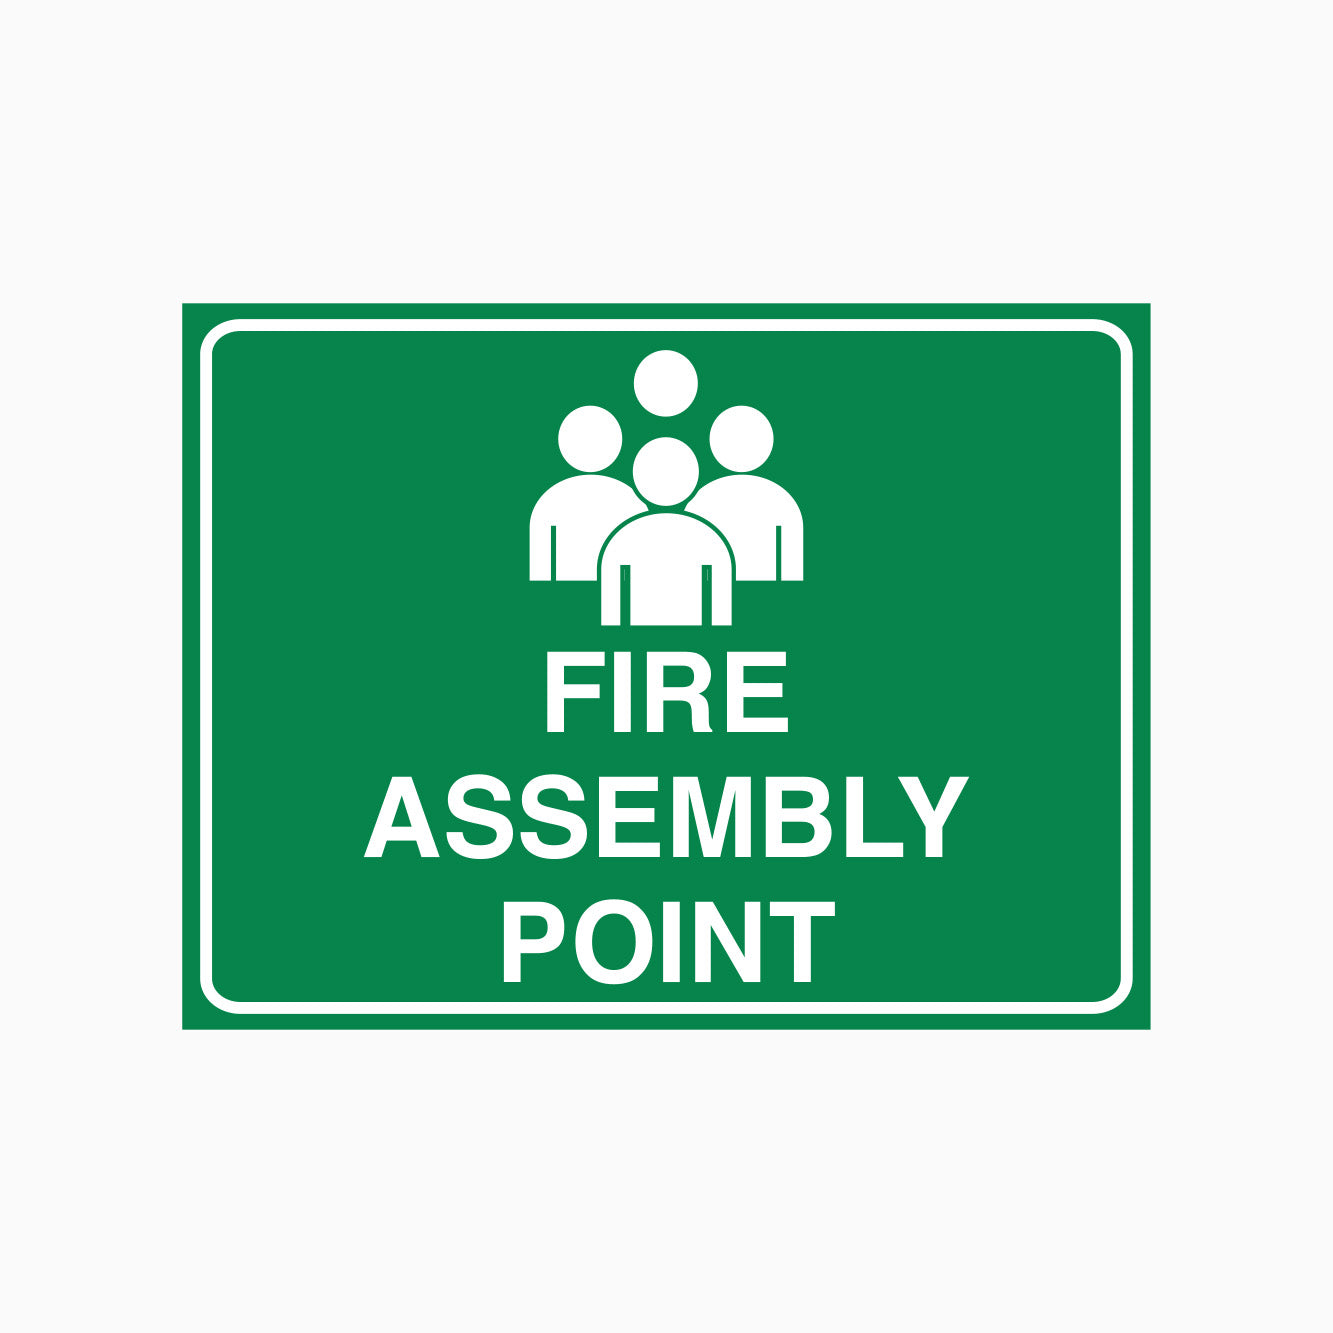 FIRE ASSEMBLY POINT SIGN - GET SIGNS AUSTRALAI